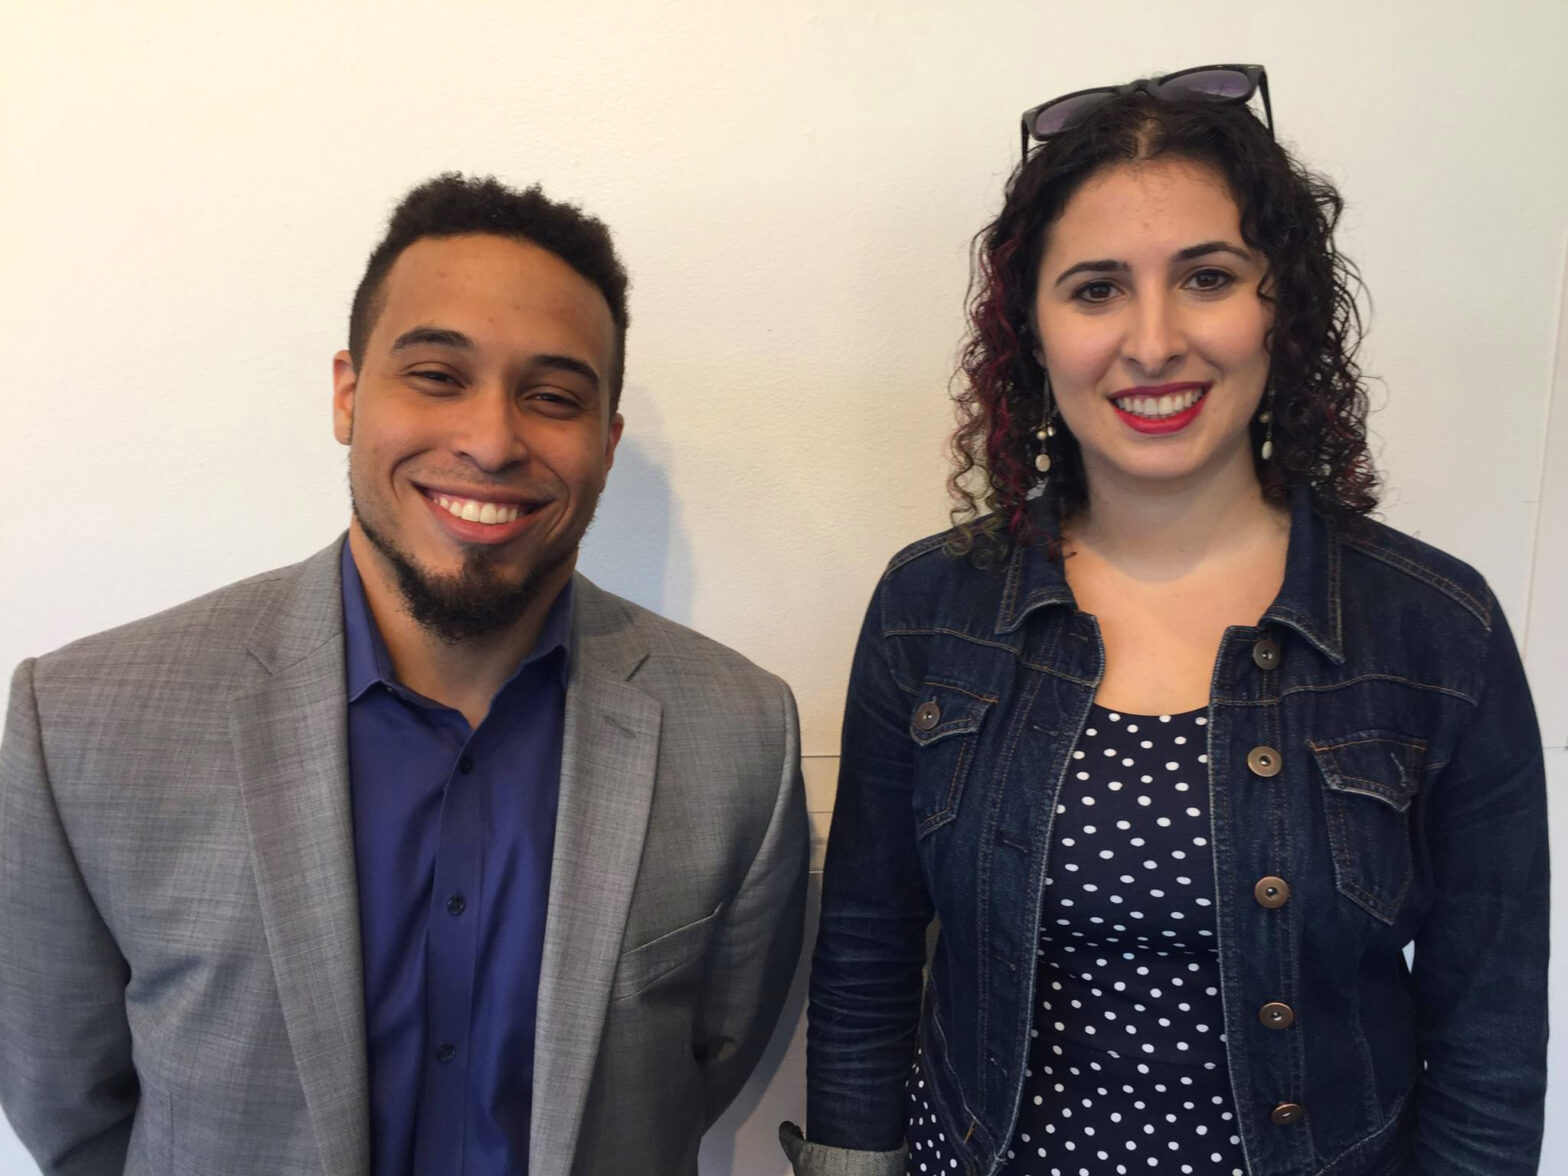 Park Welcomes Rose Berns-Zieve ’11 and Yohance Allette ’05 as 2017 Millhauser Fellows